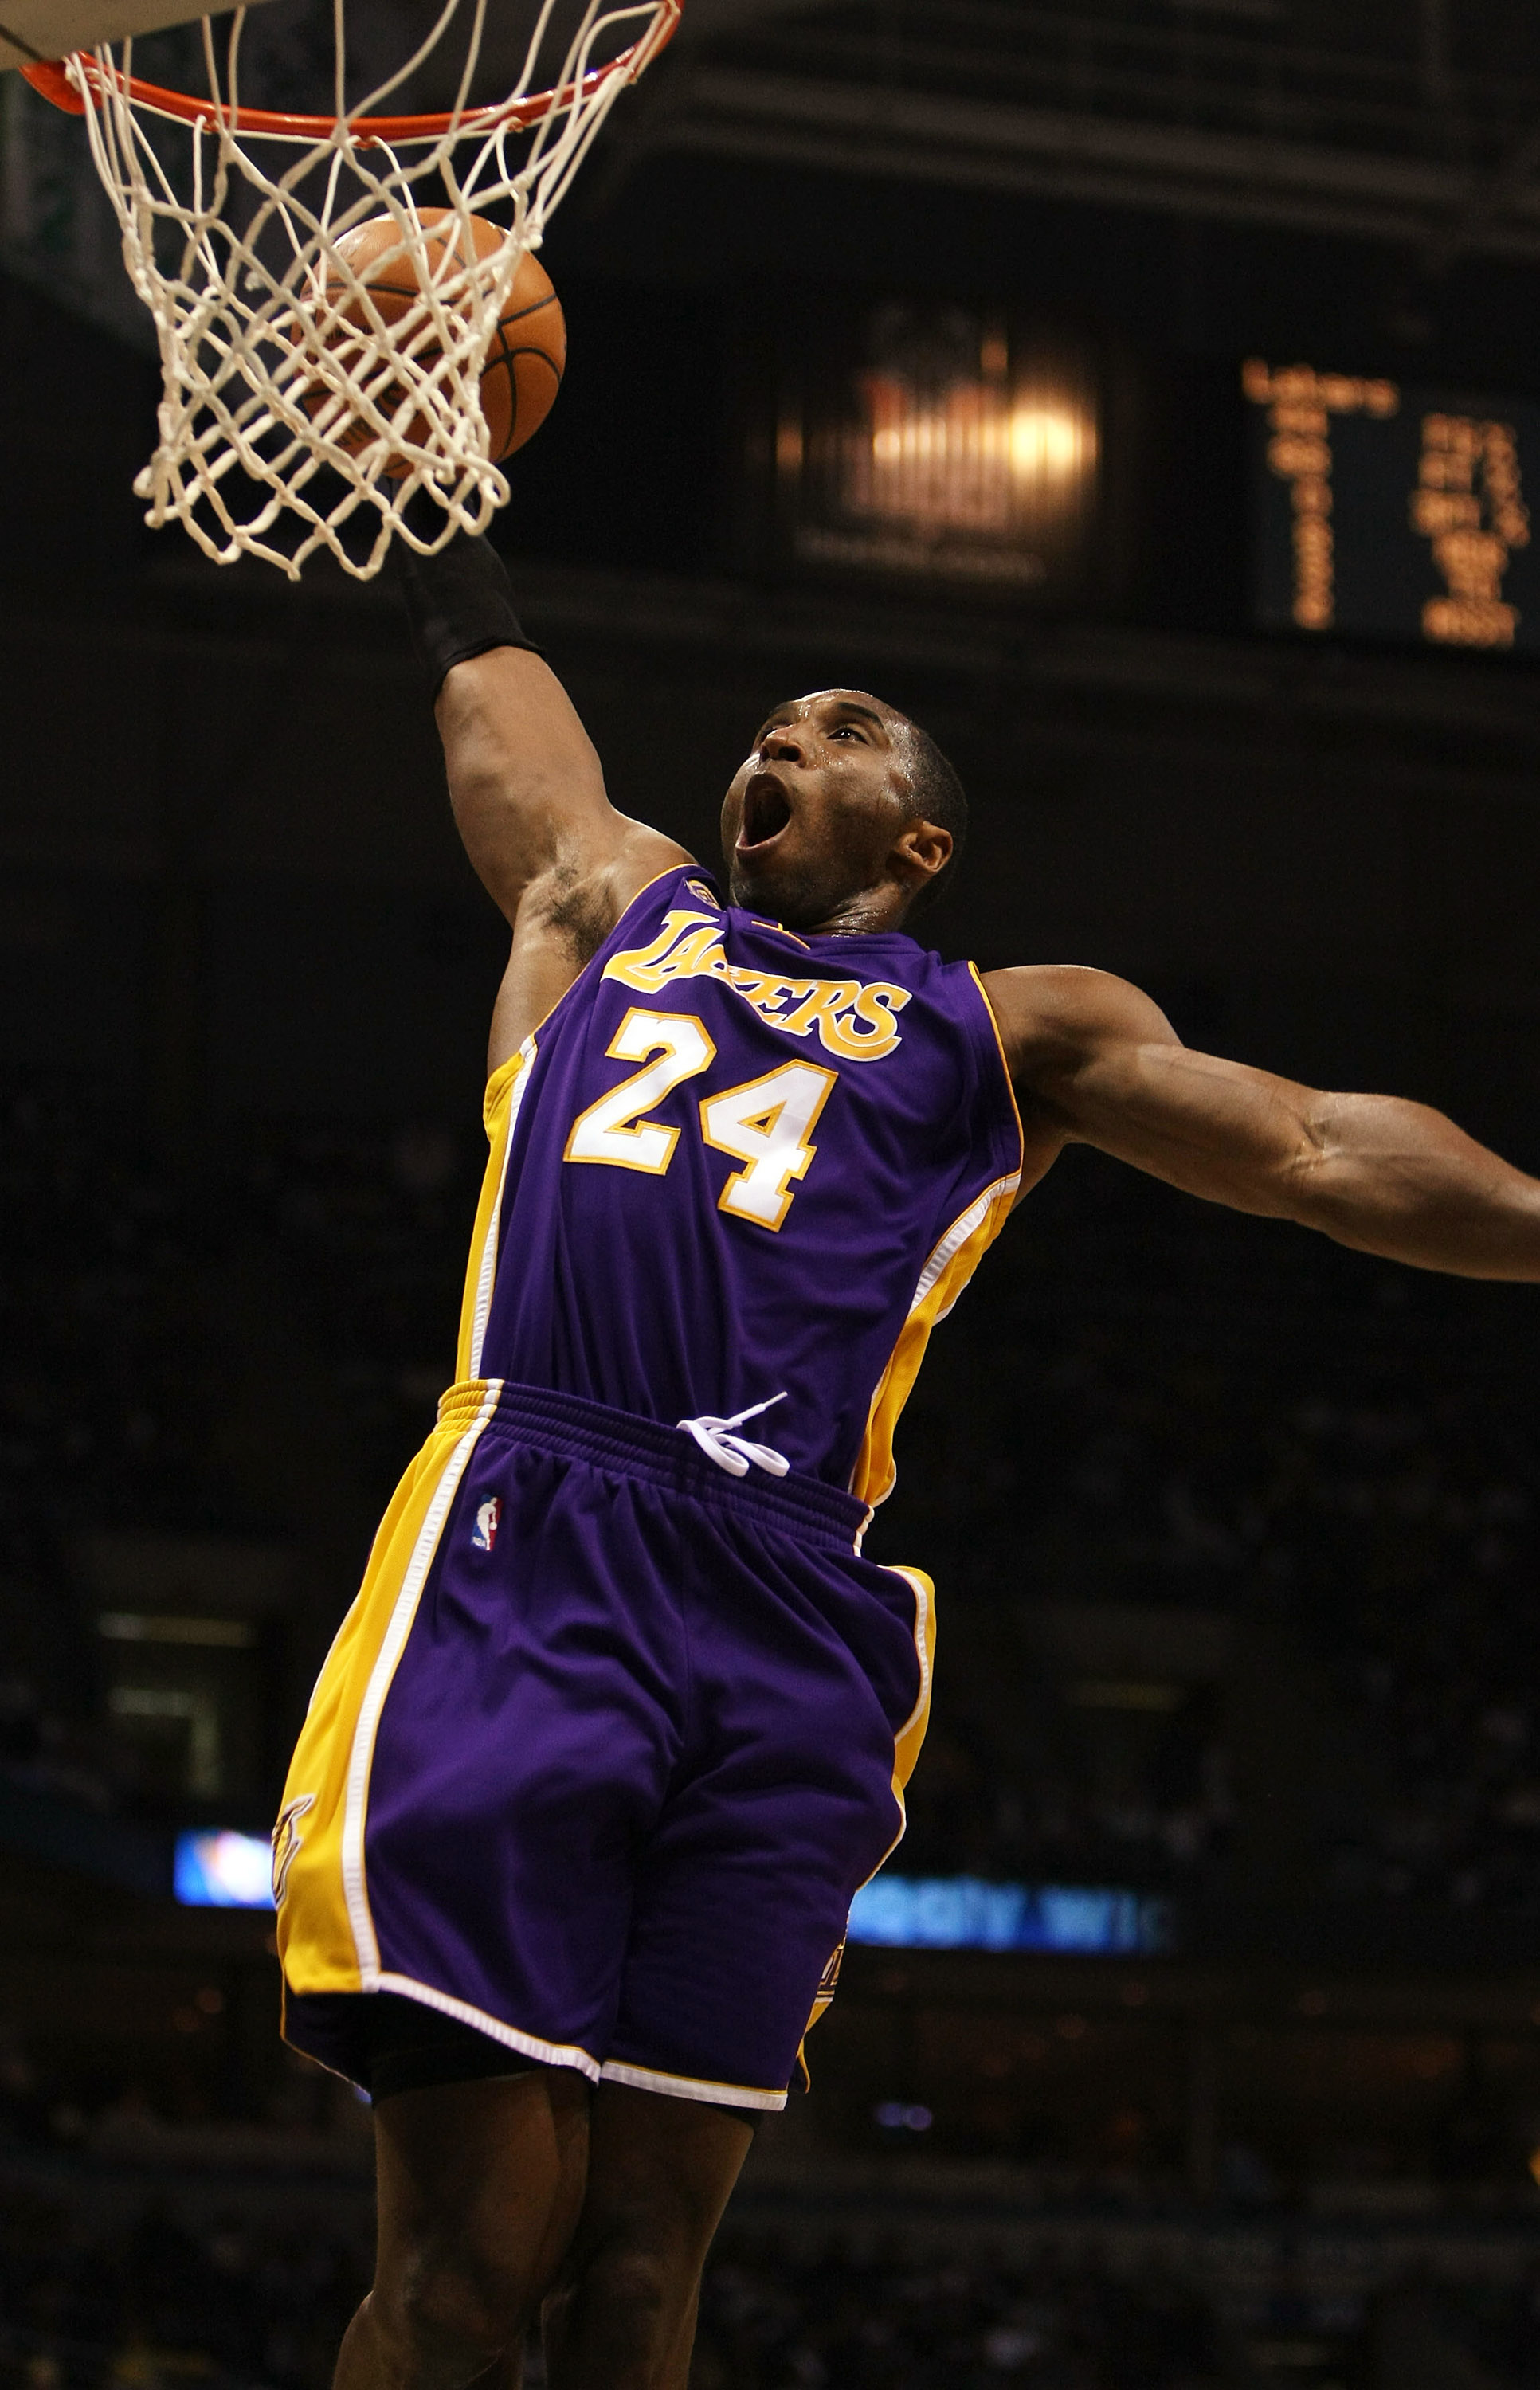 MILWAUKEE - NOVEMBER 21: Kobe Bryant#24 of the Los Angeles Lakers dunks the ball against the Milwaukee Bucks on November 21, 2007 at the Bradley Center in Milwaukee, Wisconsin. NOTE TO USER: User expressly acknowledges and agreees that, by downloading and